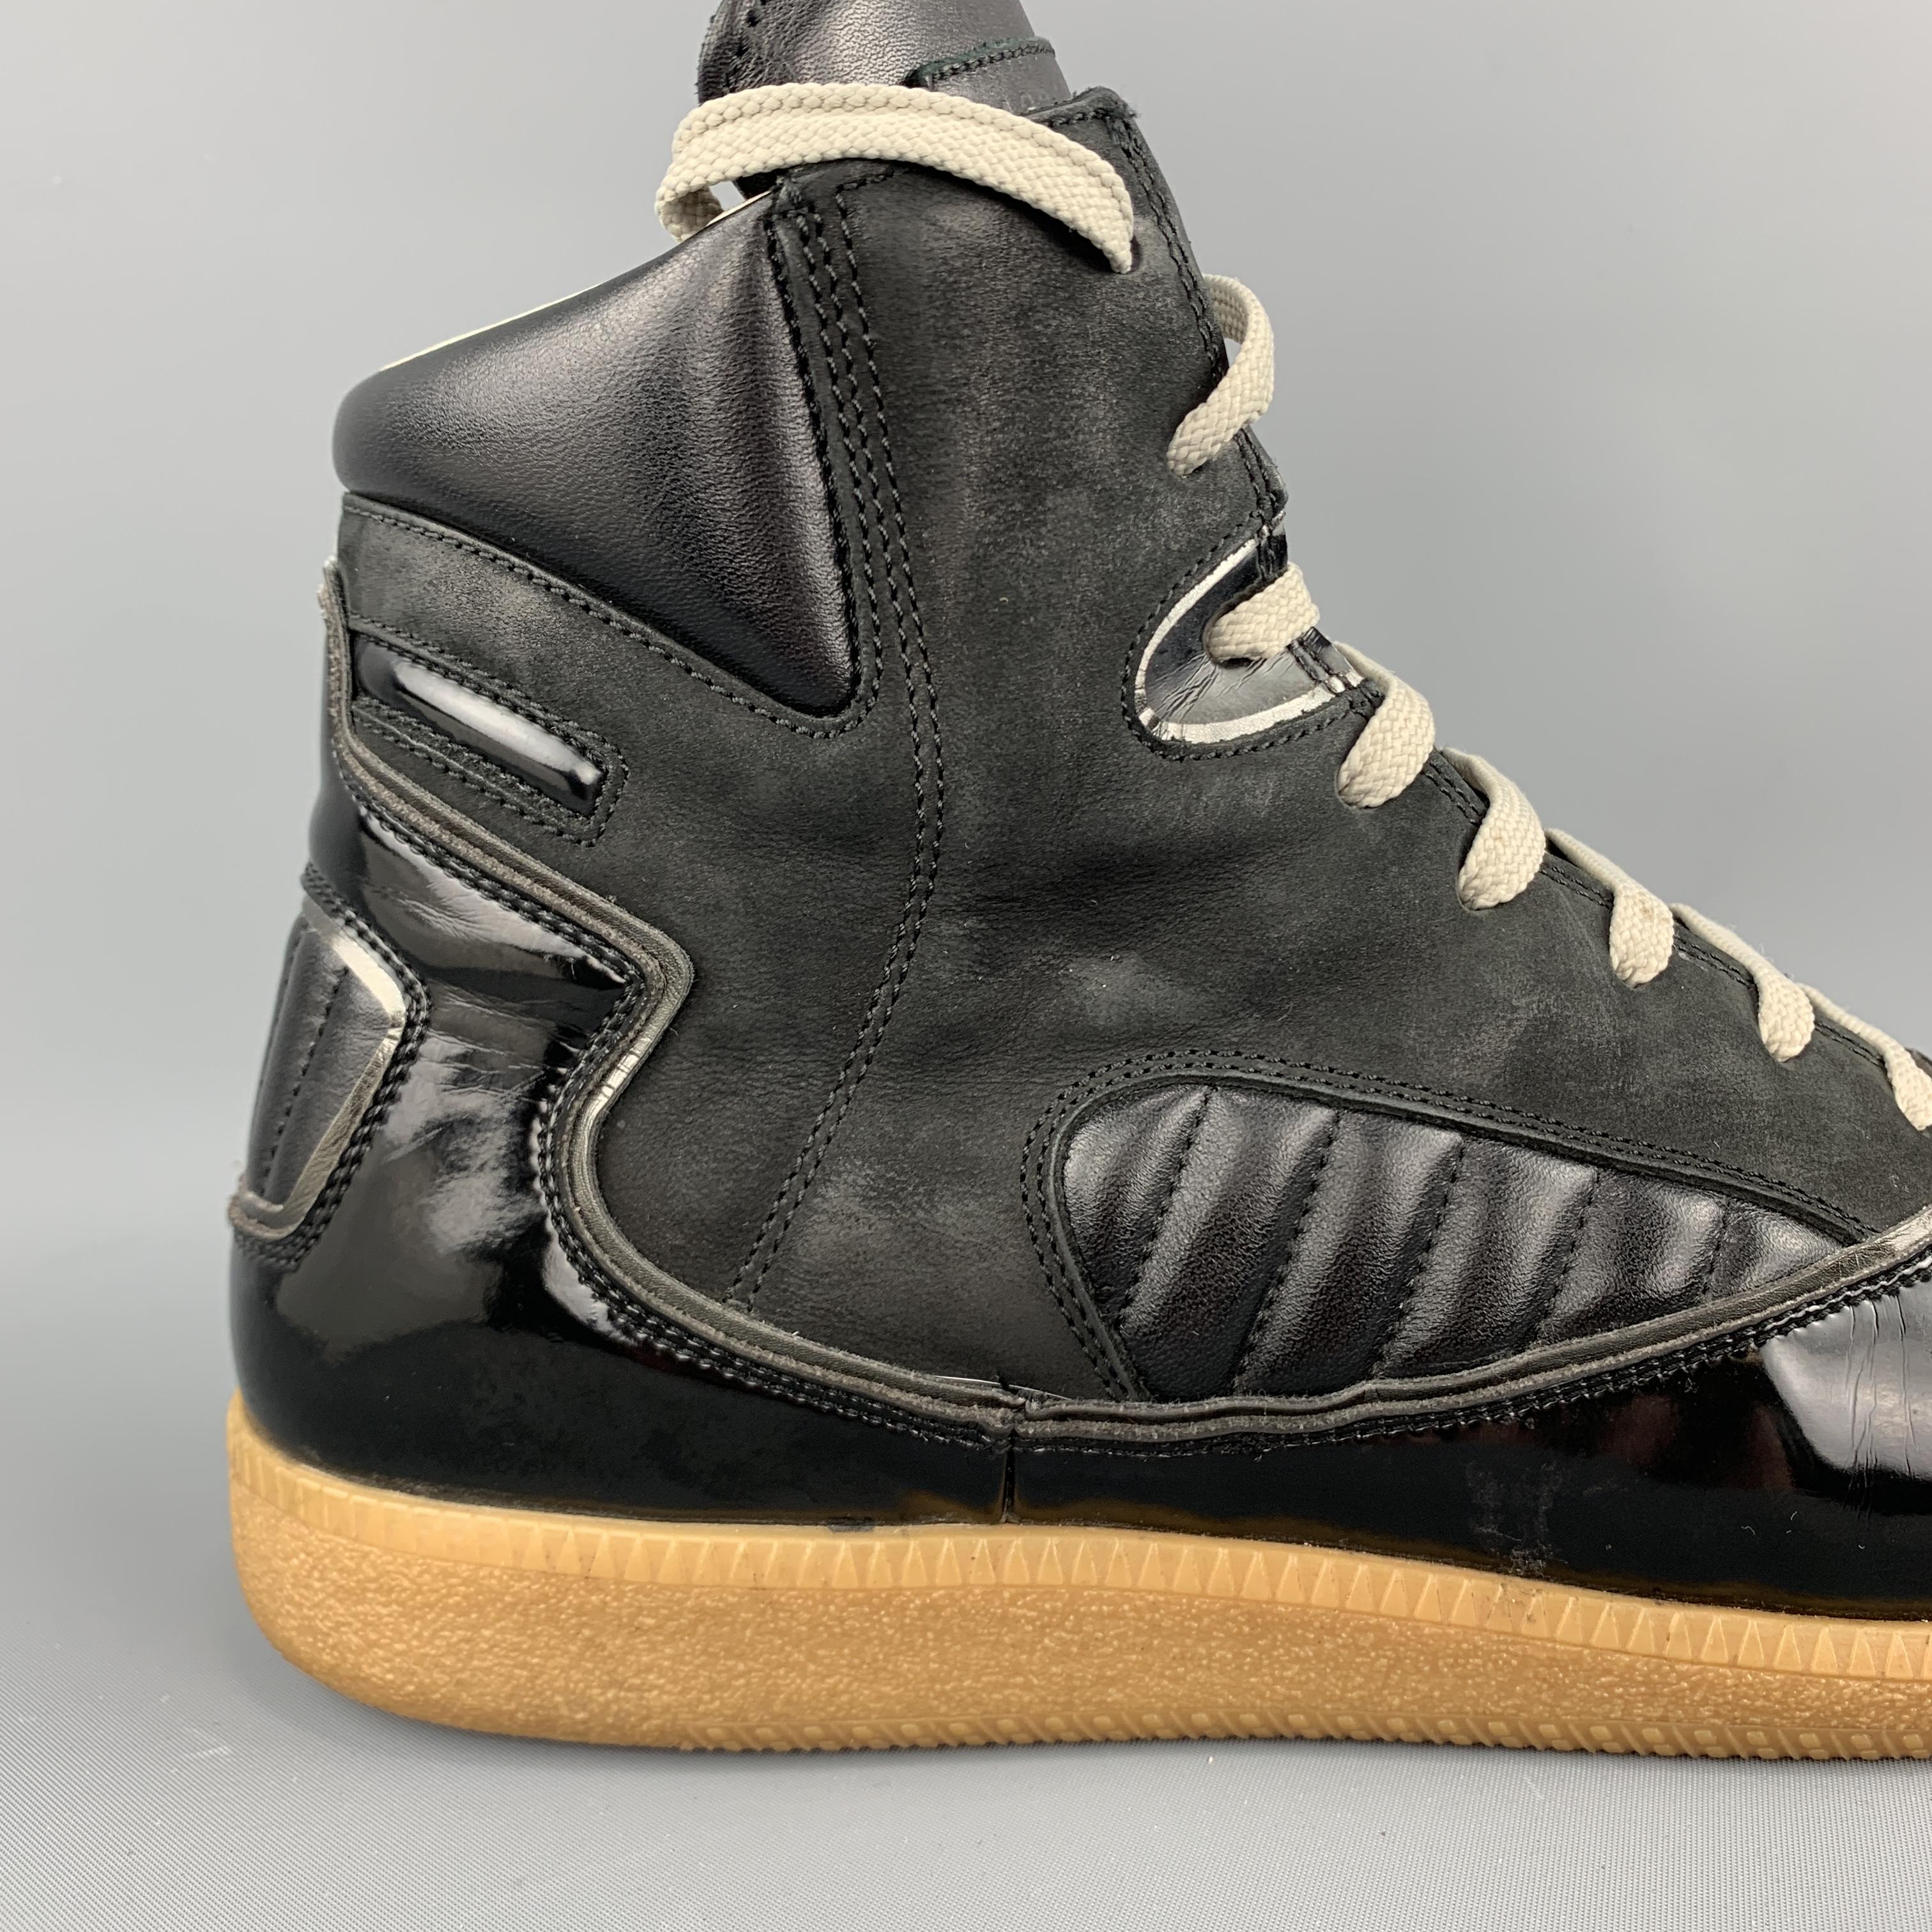 MAISON MARTIN MARGIELA replica high top sneakers come in black patent leather with smooth quilted leather details, metallic leather piping, and tan gum sole. With box. Made in Italy.

Very Good Pre-Owned Condition.
Marked: IT 42

Outsole:  11.5 x 4